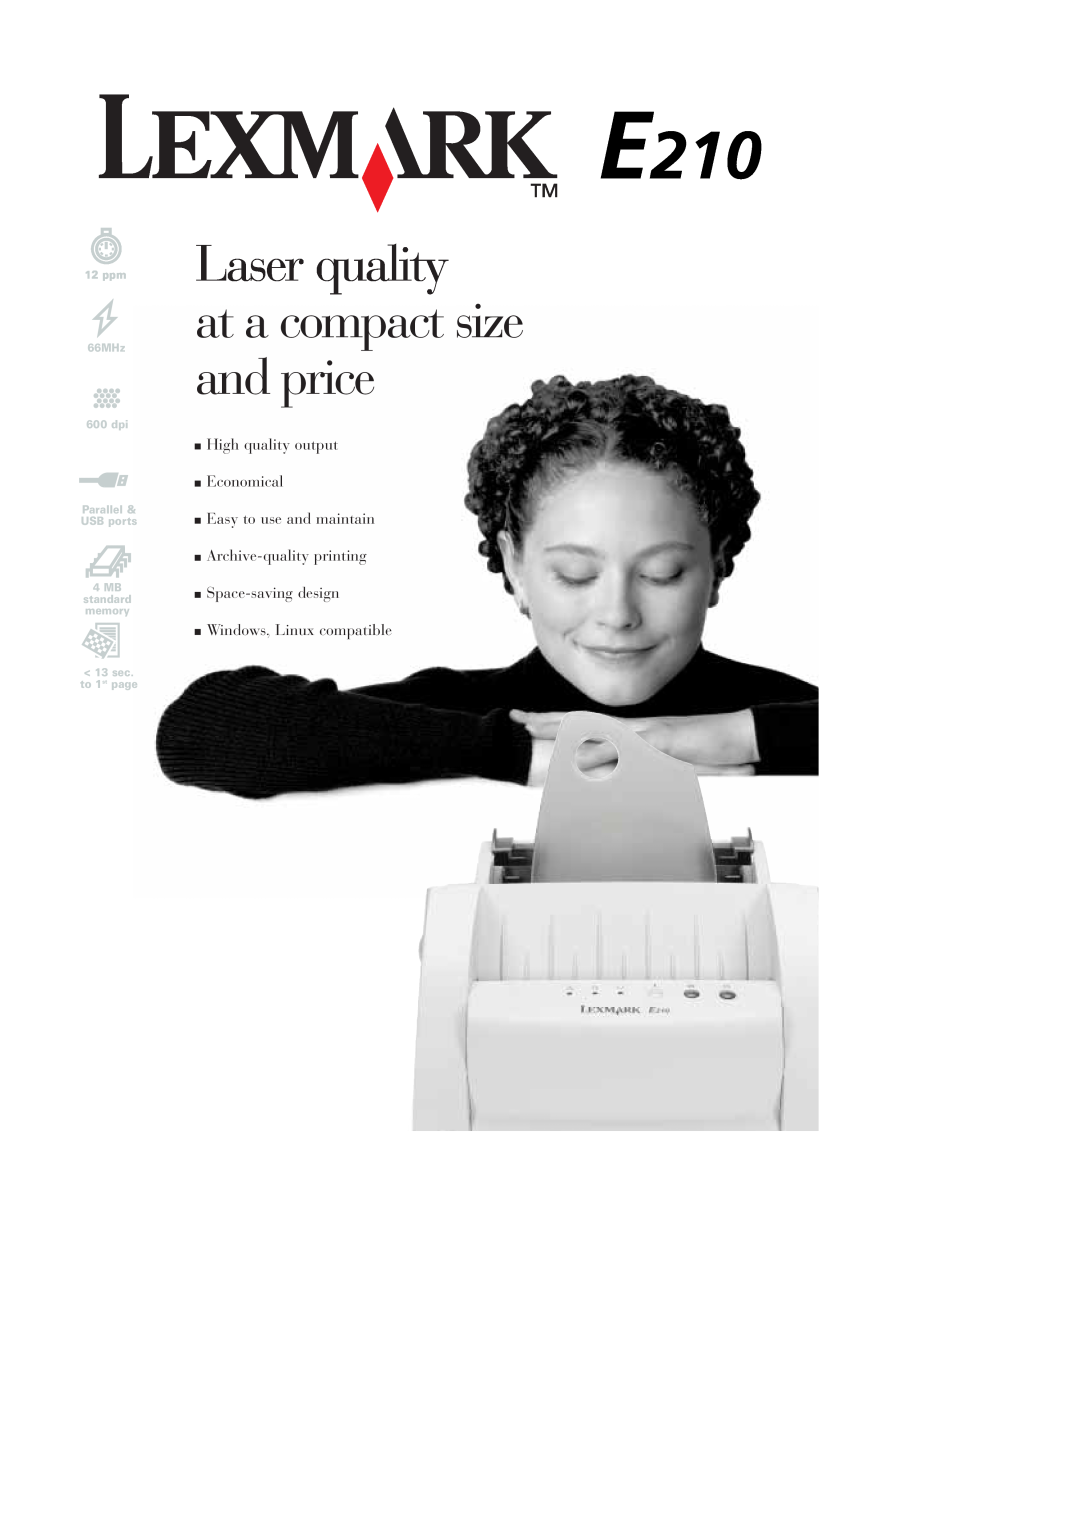 Lexmark E210 manual Laser quality at a compact size and price, High quality output Economical Easy to use and maintain 